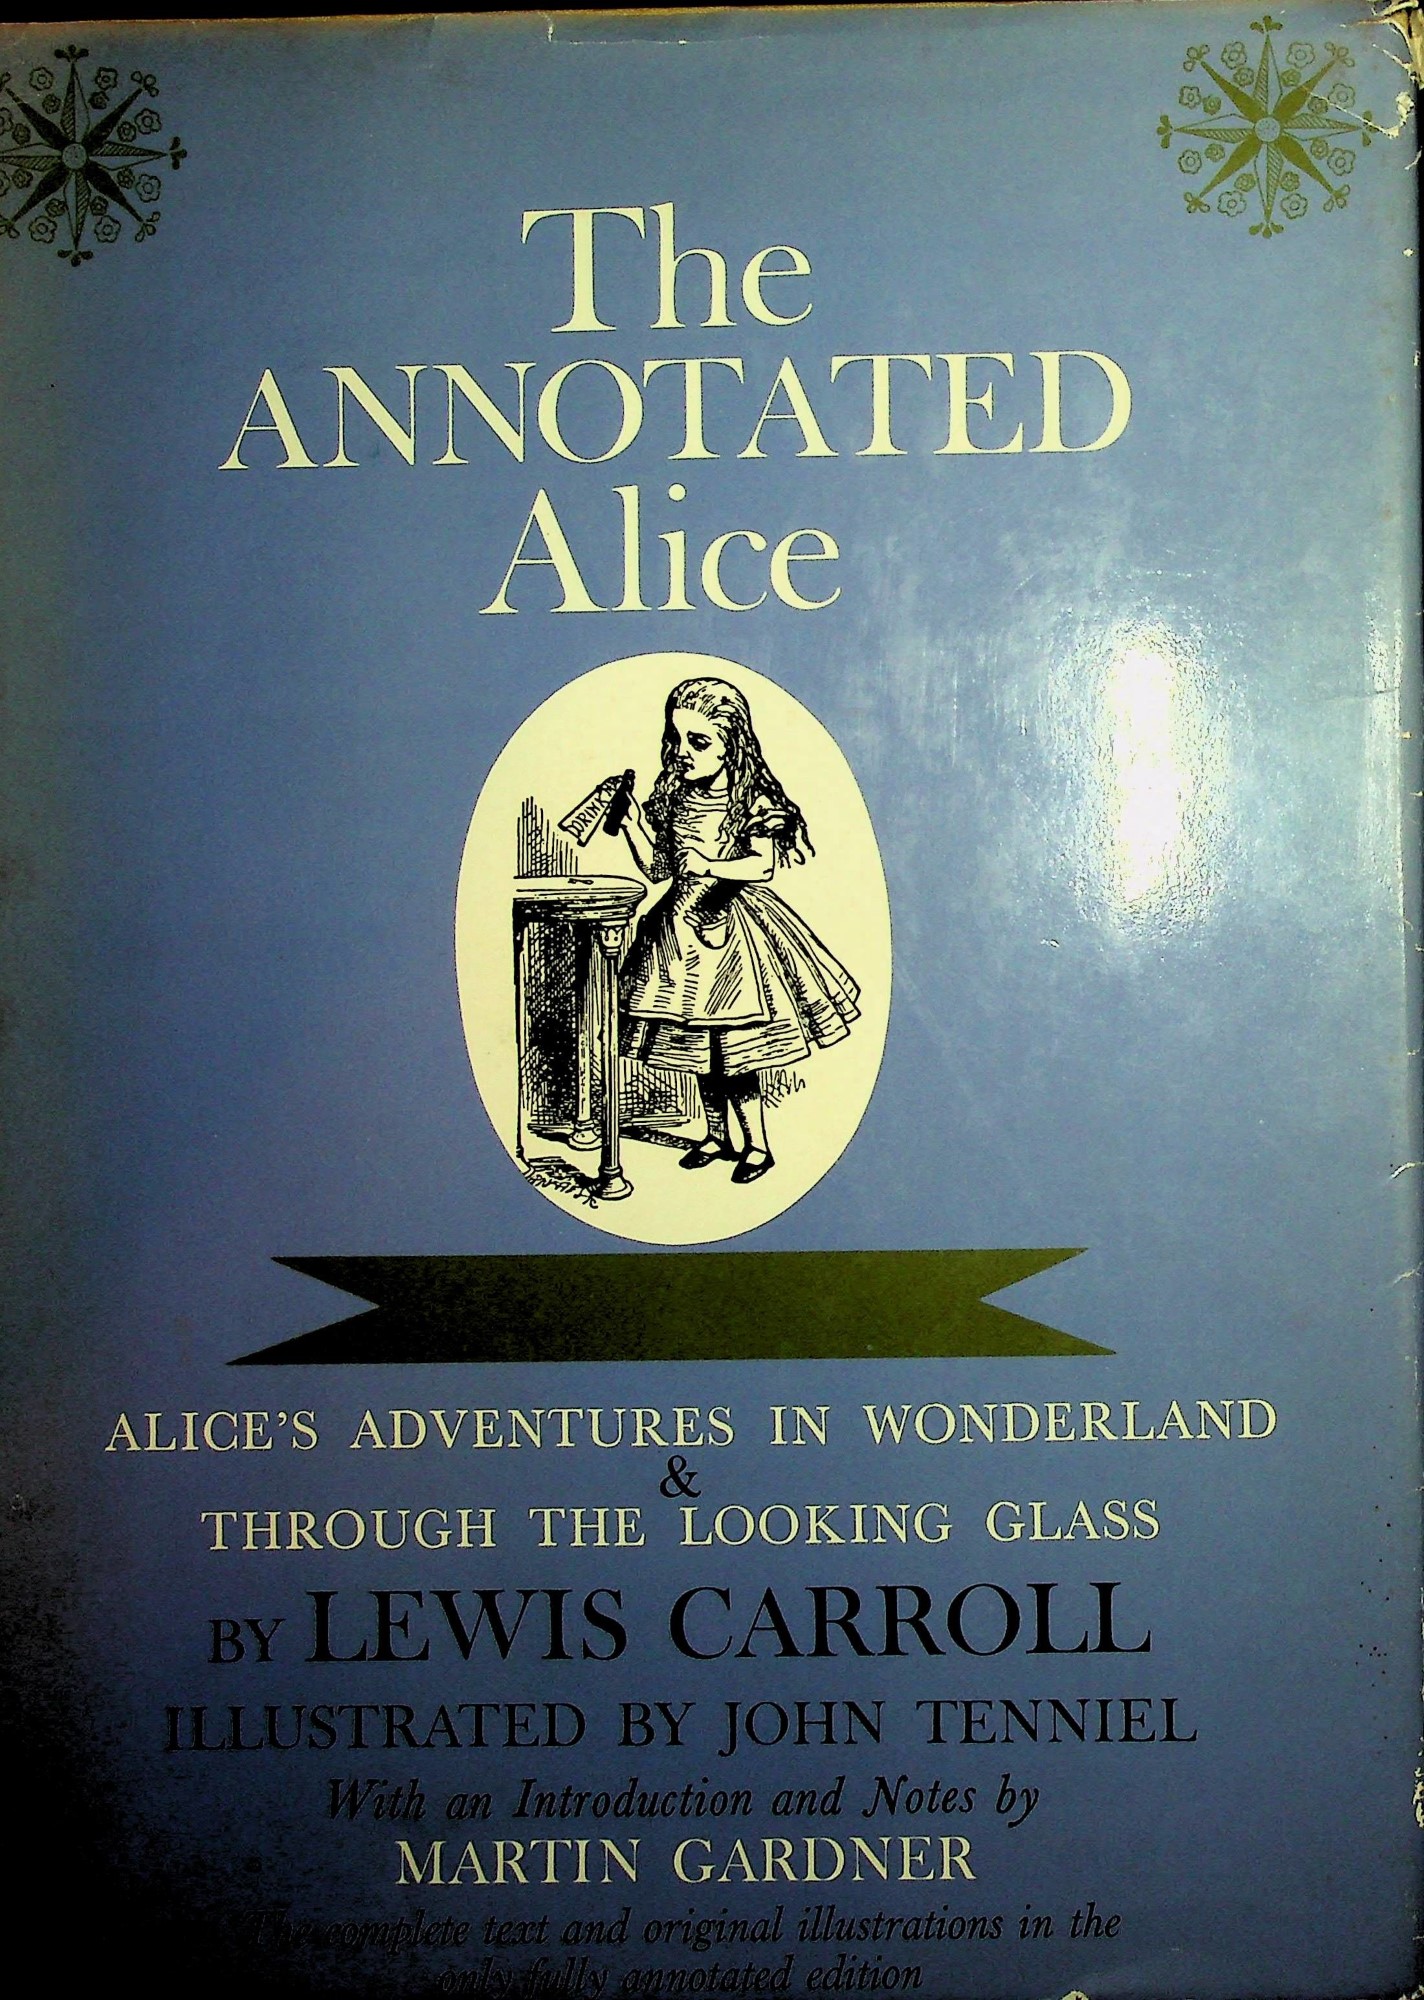 The Annotated Alice - Lewis Carroll, with Introduction and Notes by Martin Gardner